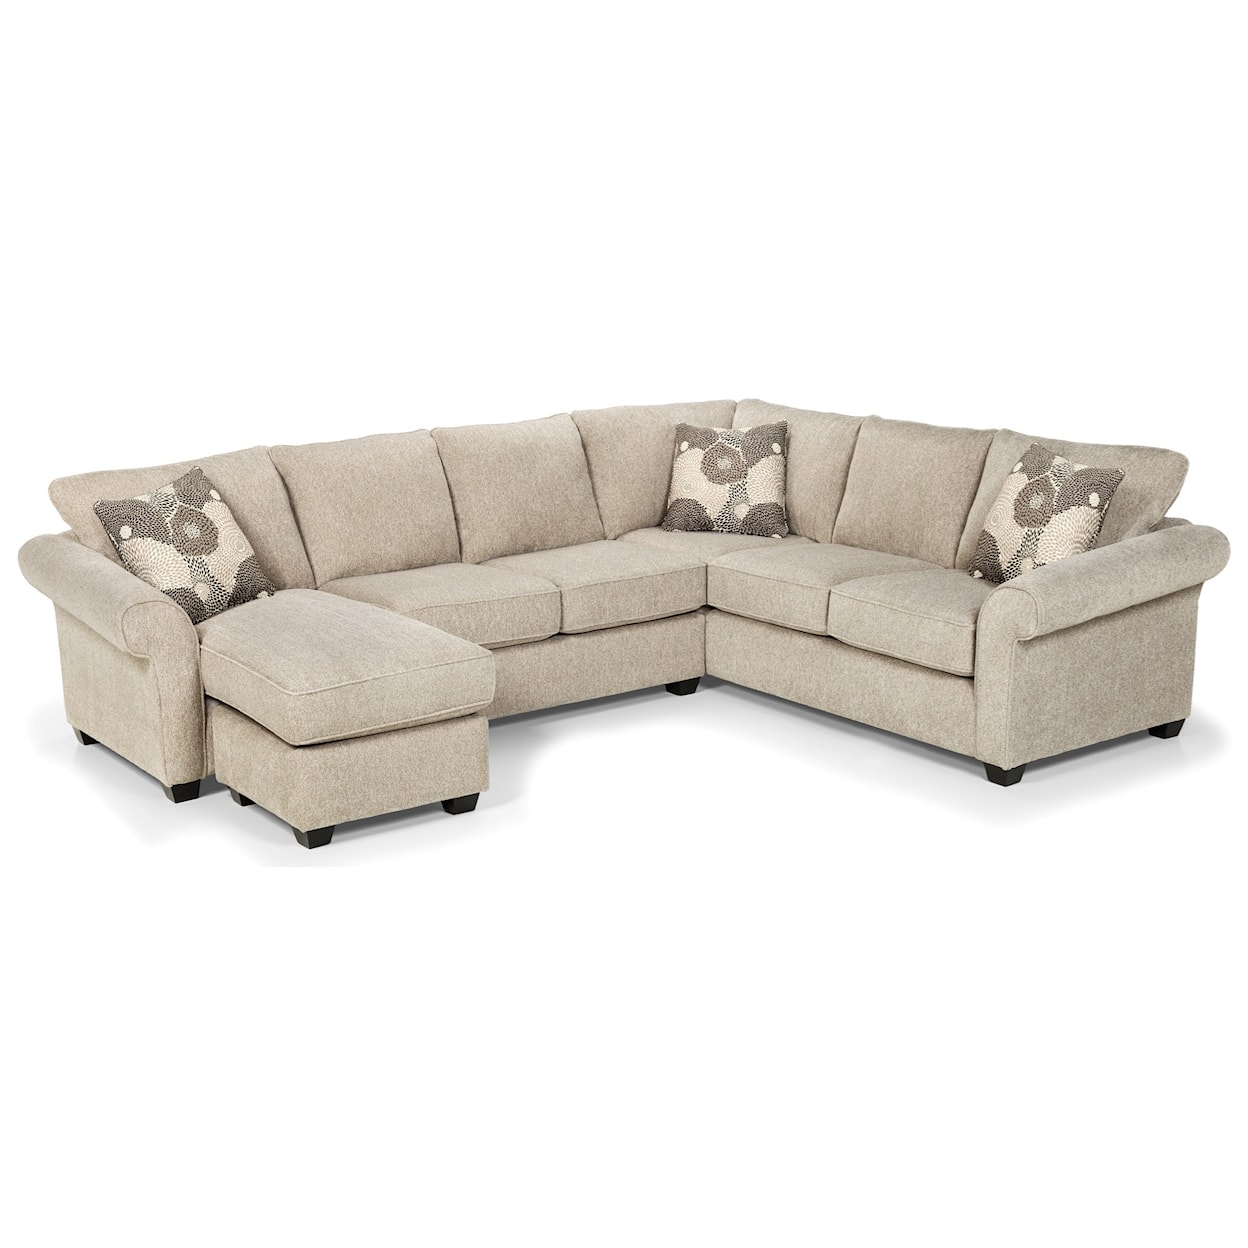 Sunset Home 464 5-Seat Sectional Sofa w/ LAF Chaise Lounge